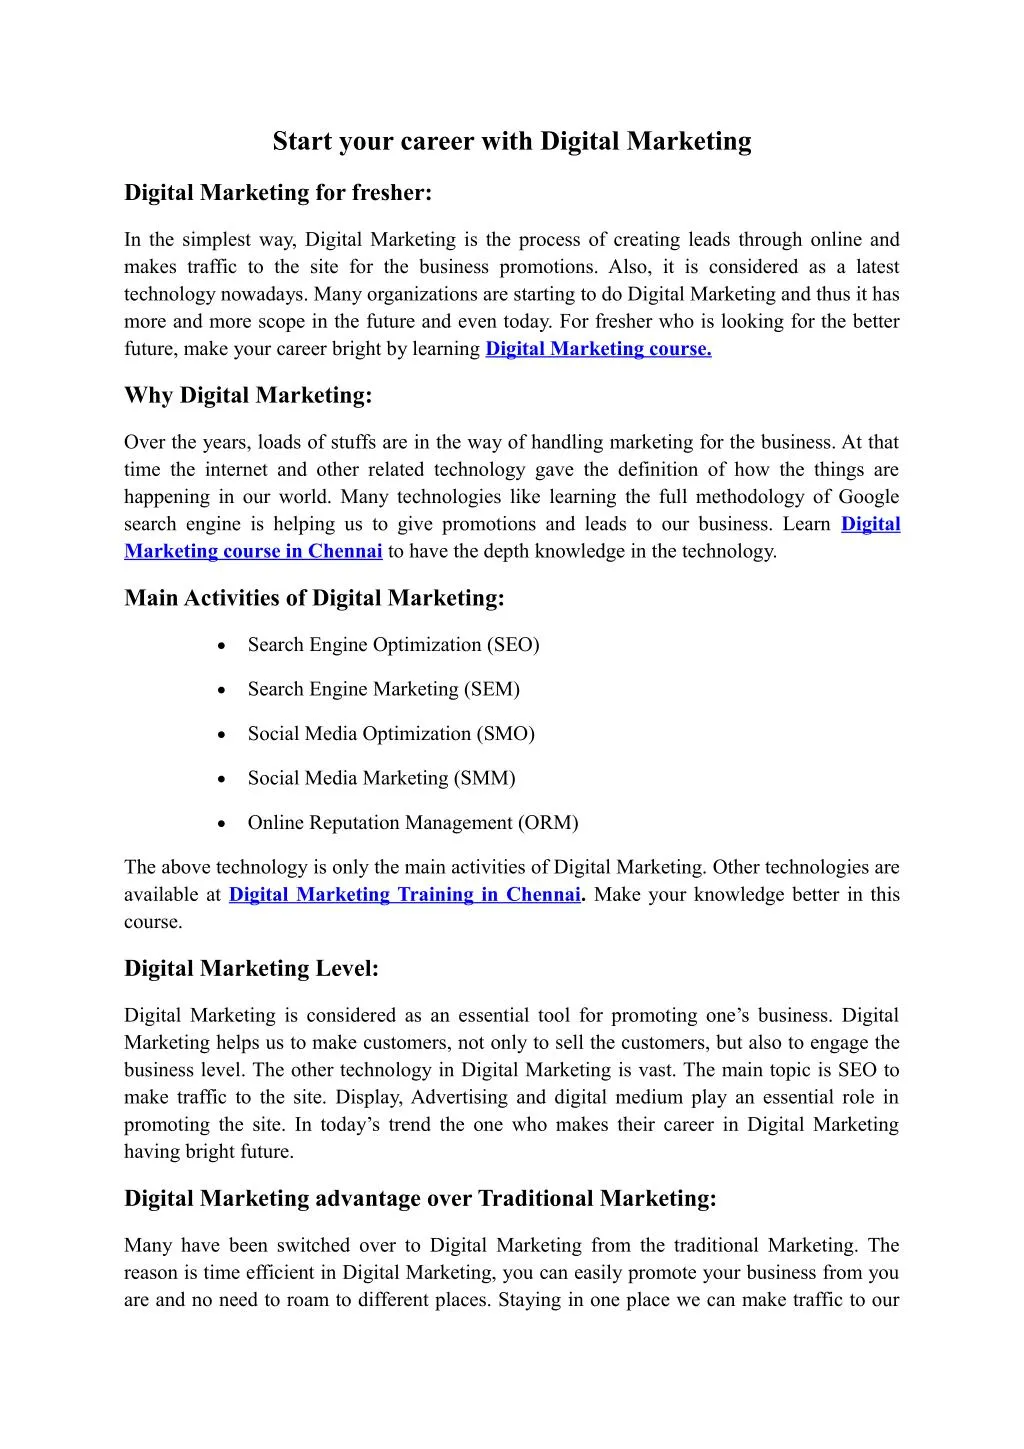 start your career with digital marketing